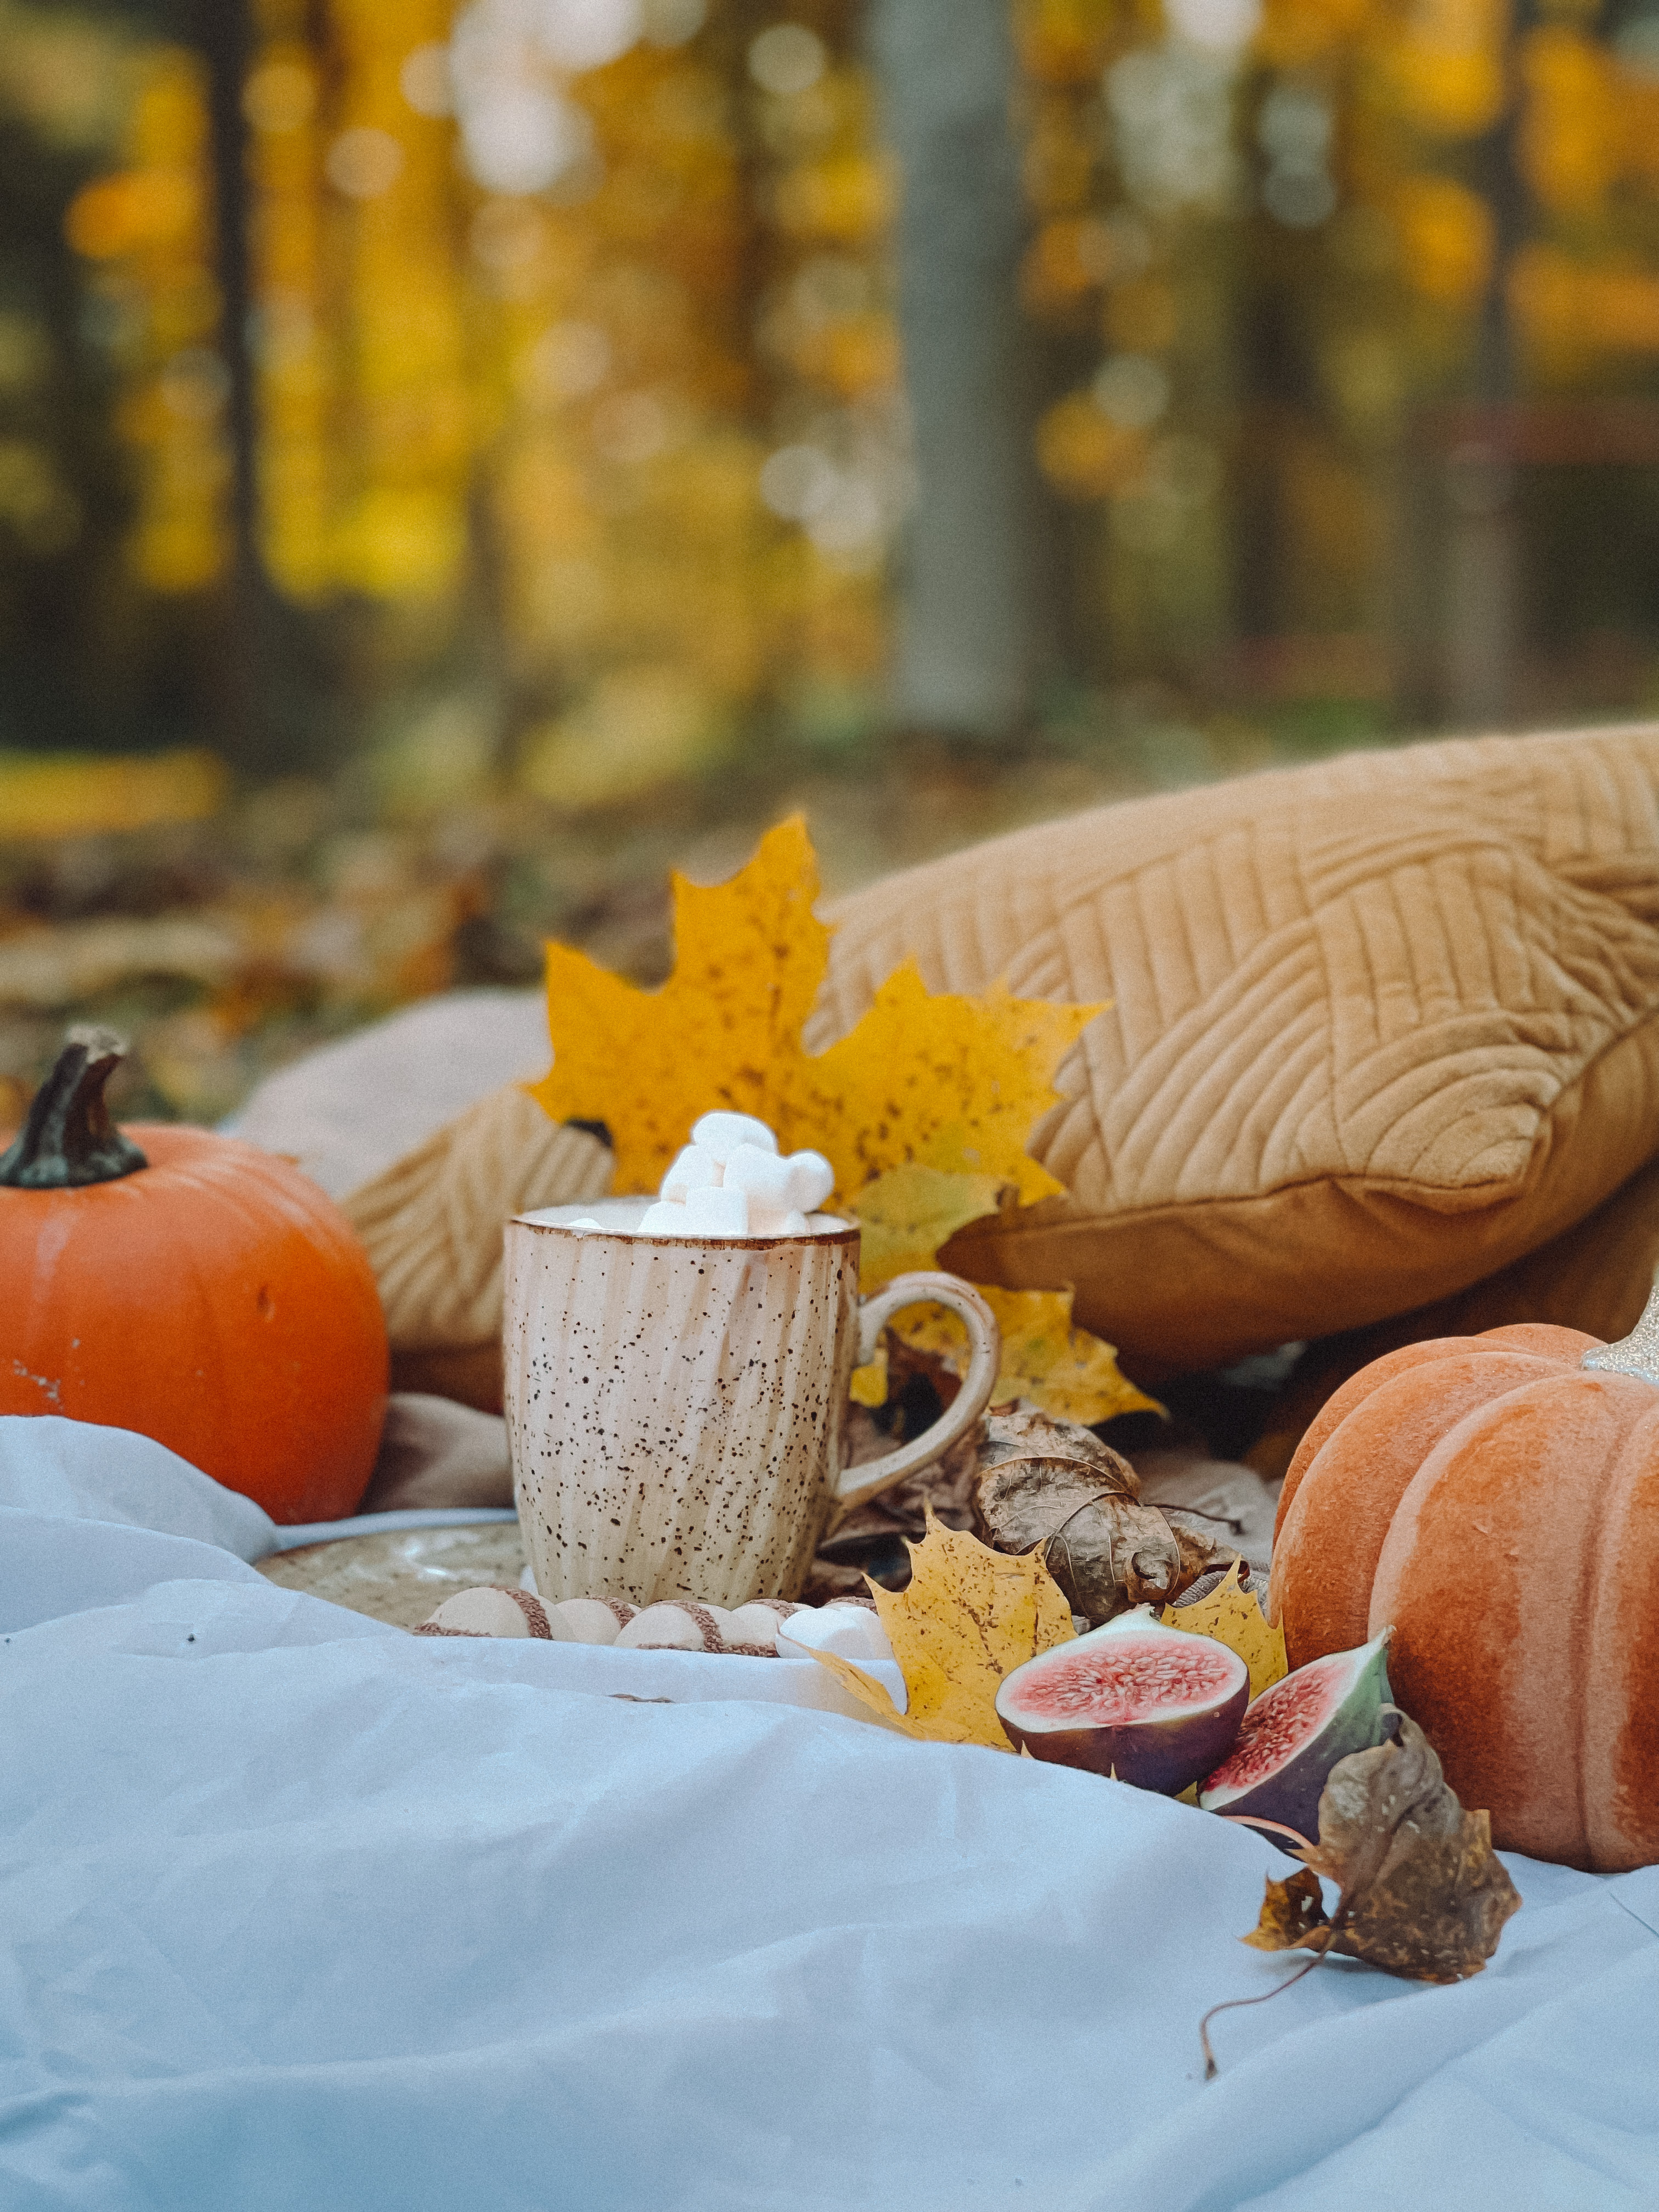 Mug with marshmallows surrounded by pumpkins leaves and pillows in forest